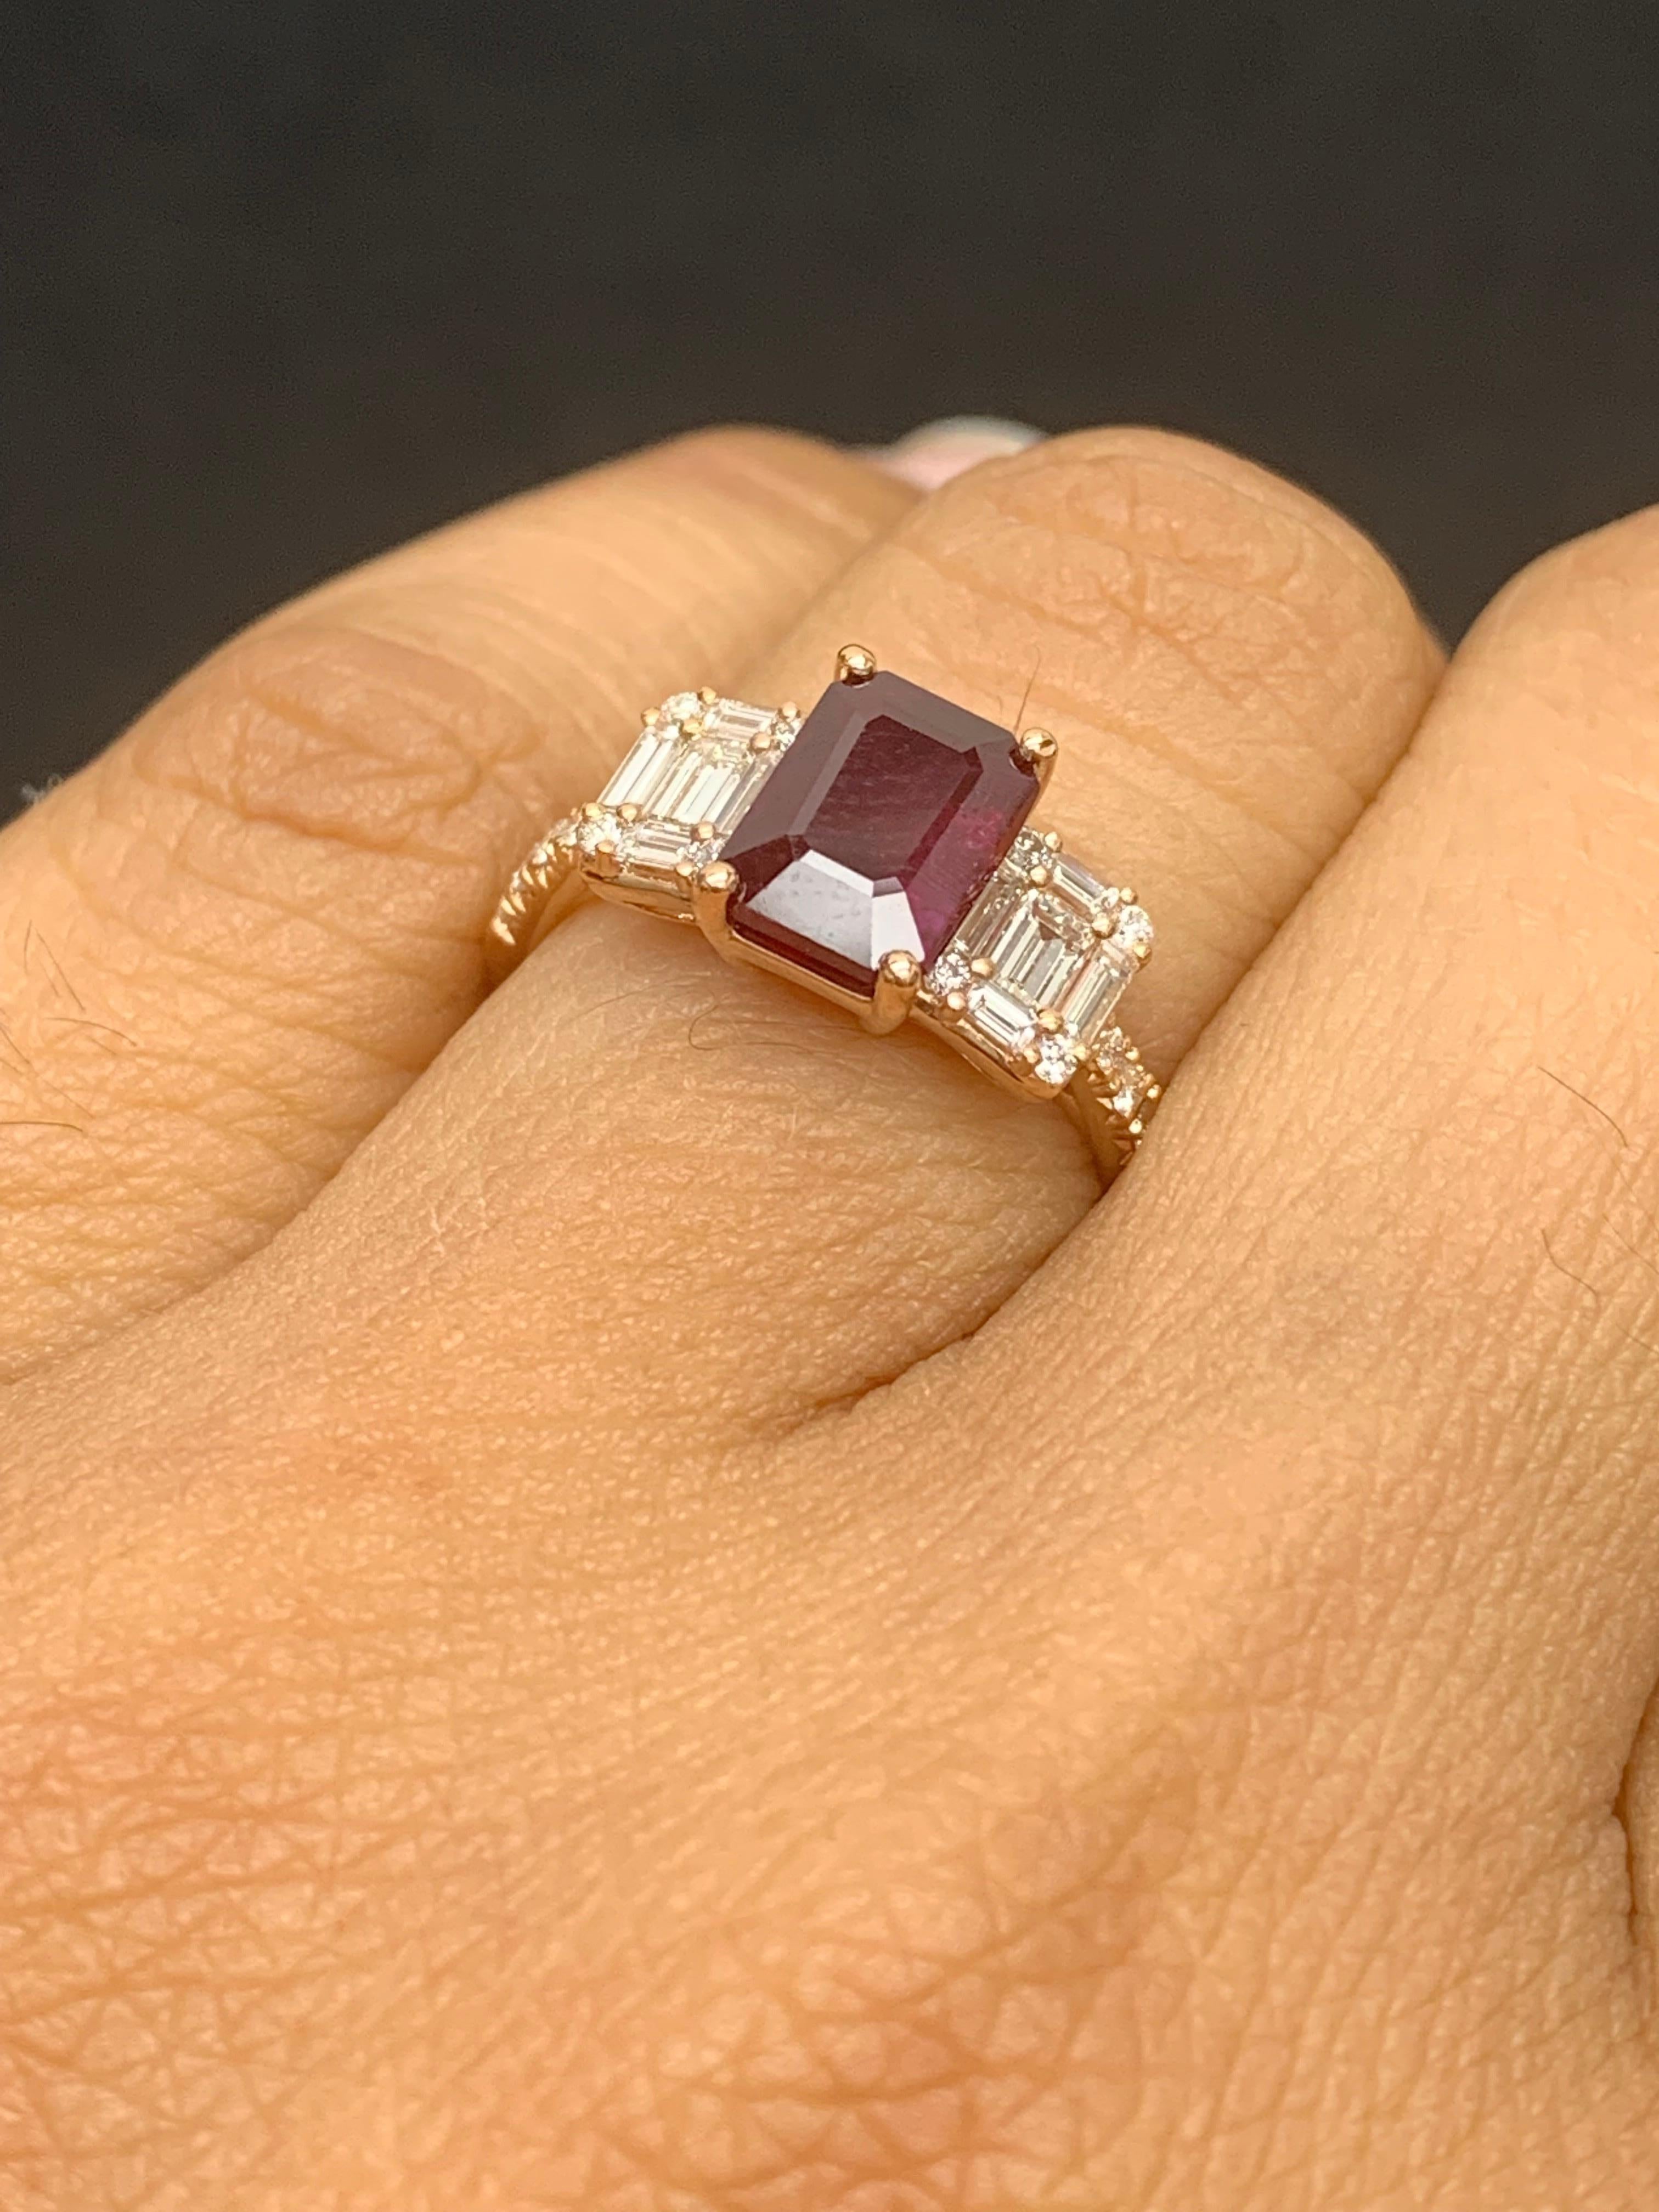 Modern 1.87 Carat Emerald Cut Ruby and Diamond Ring in 18k Rose Gold For Sale